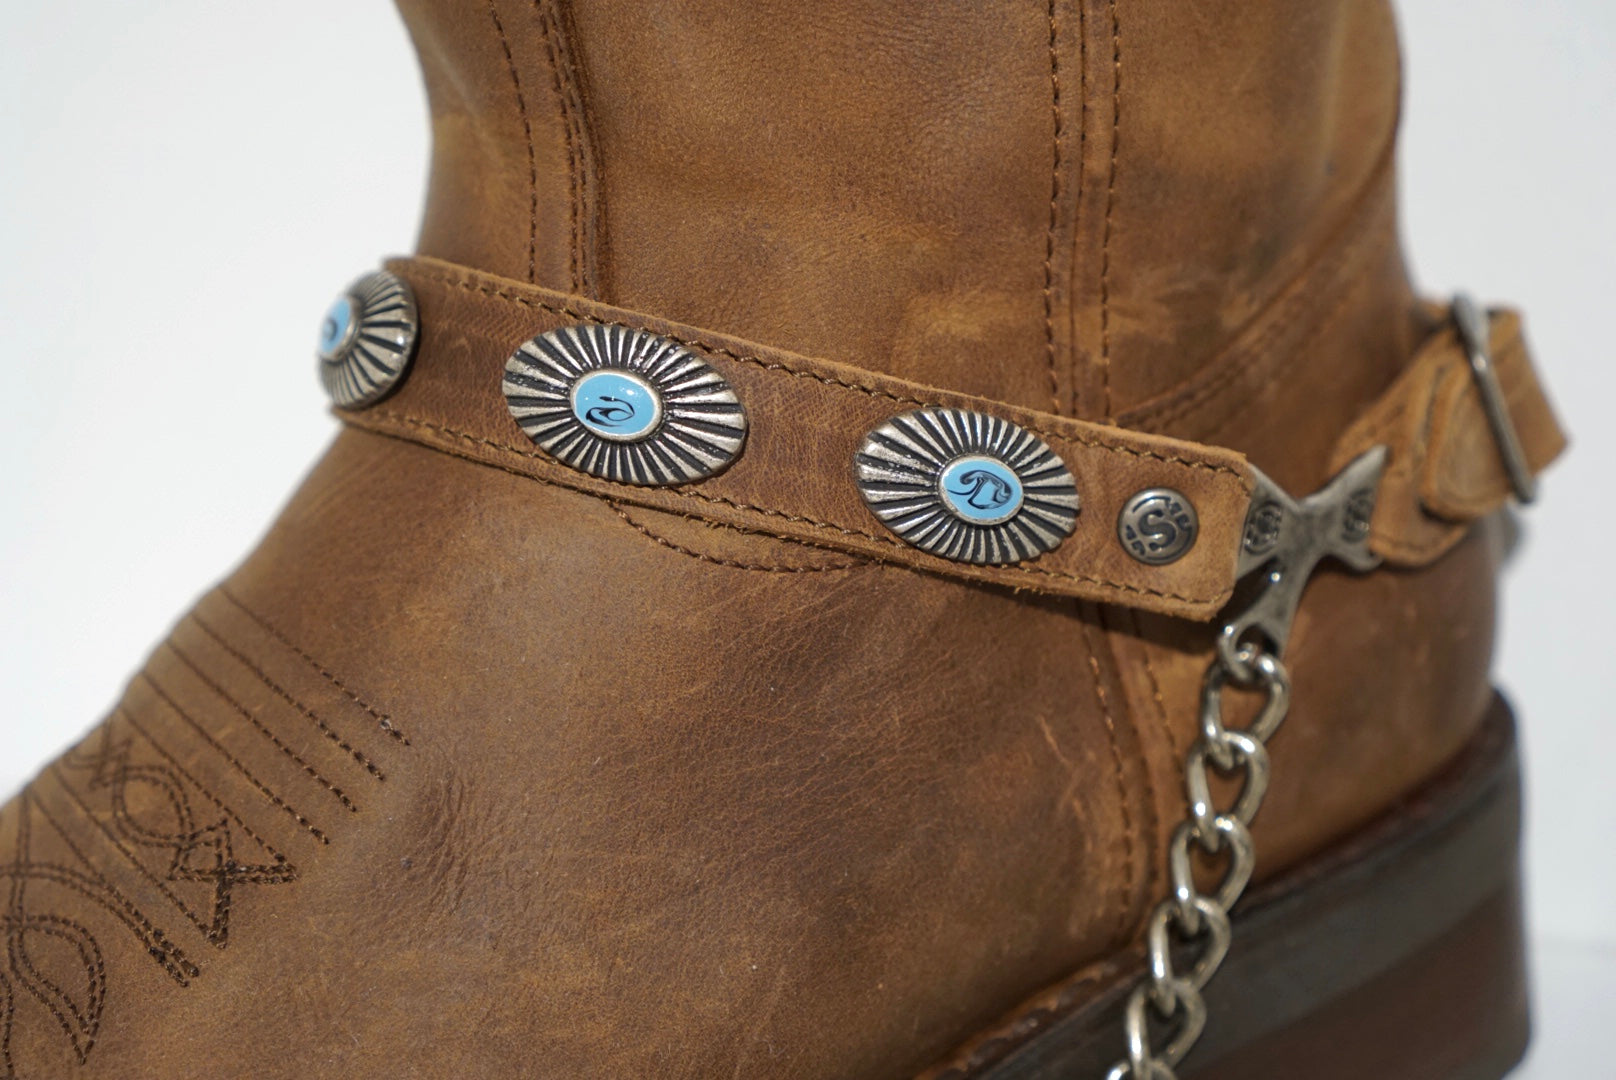 Sendra spurs - dark brown with turquoise accents